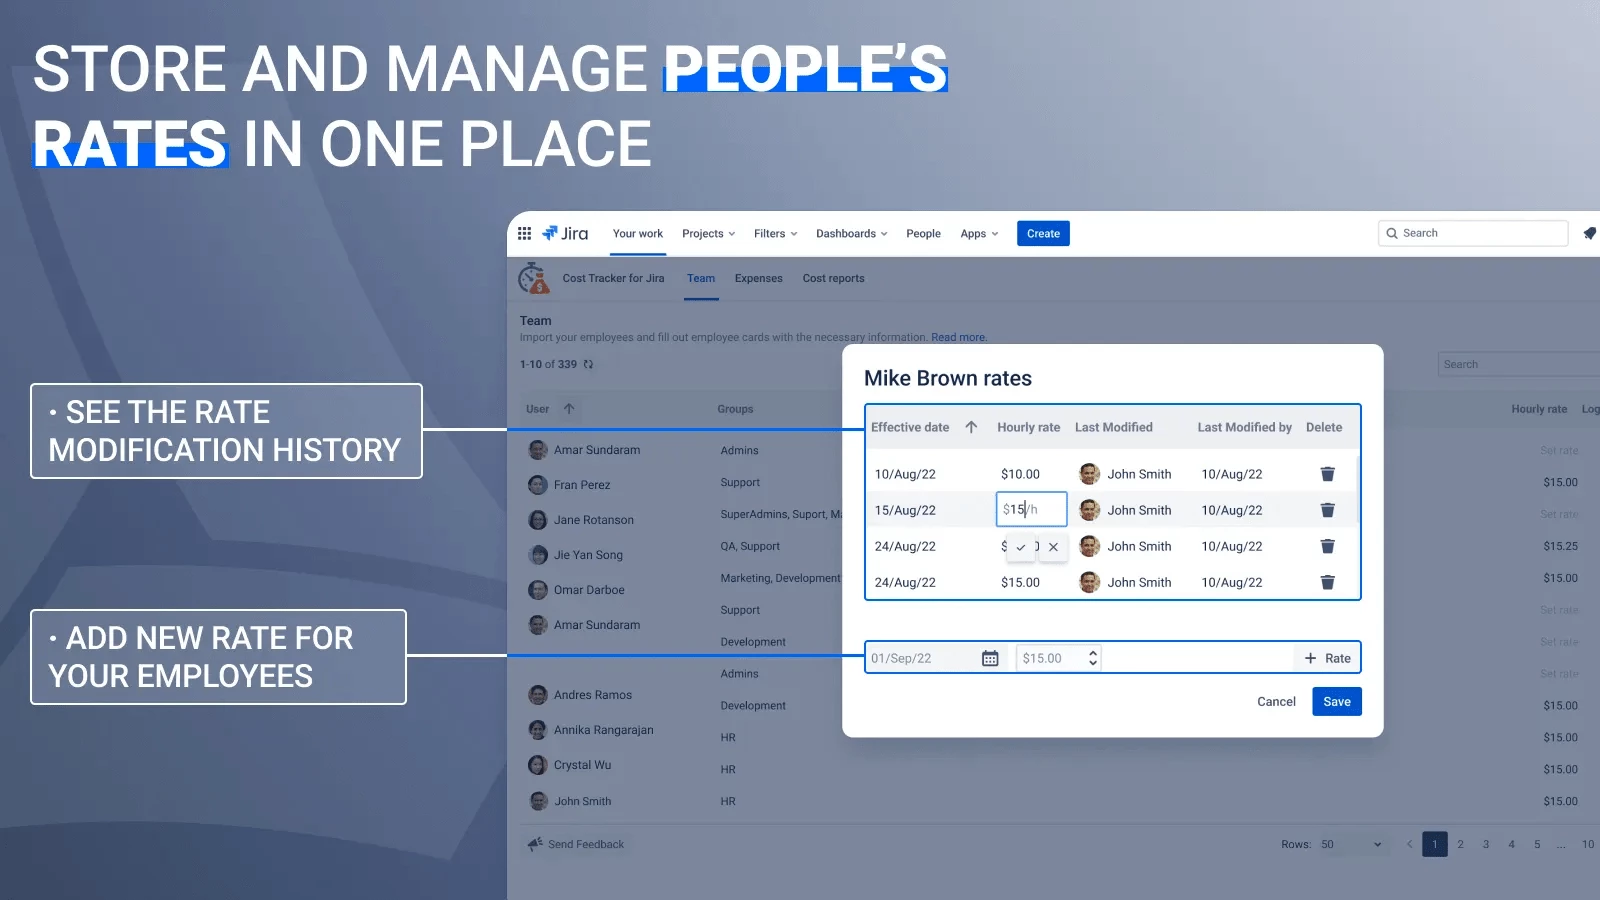 Store and manage people’s rates in one place